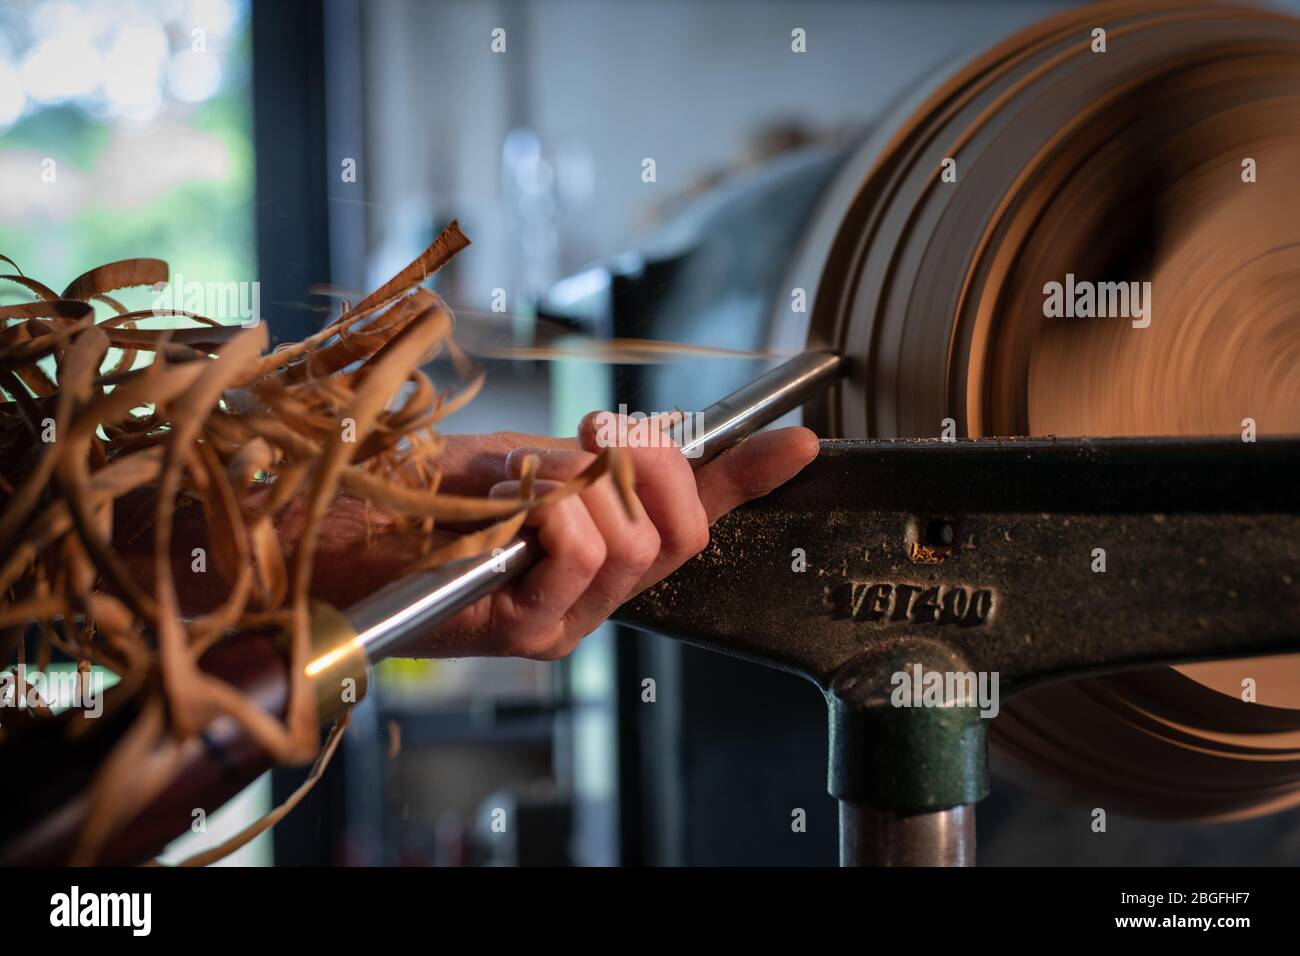 A wood turning lathe in action. Stock Photo